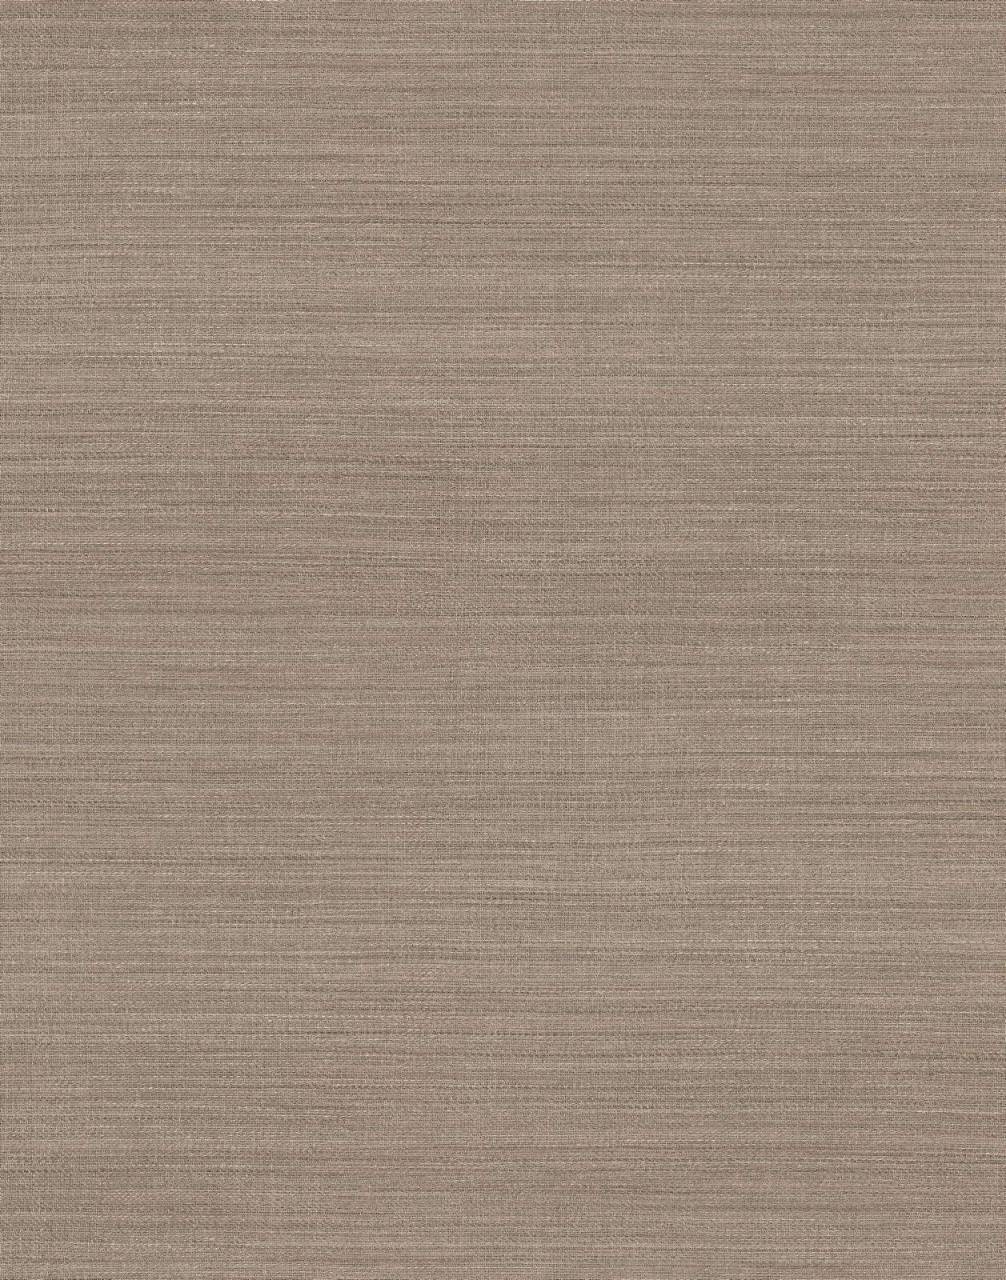 Close-up of K542 Mocha Tessea sample, featuring warm mocha brown color and delicate texture.